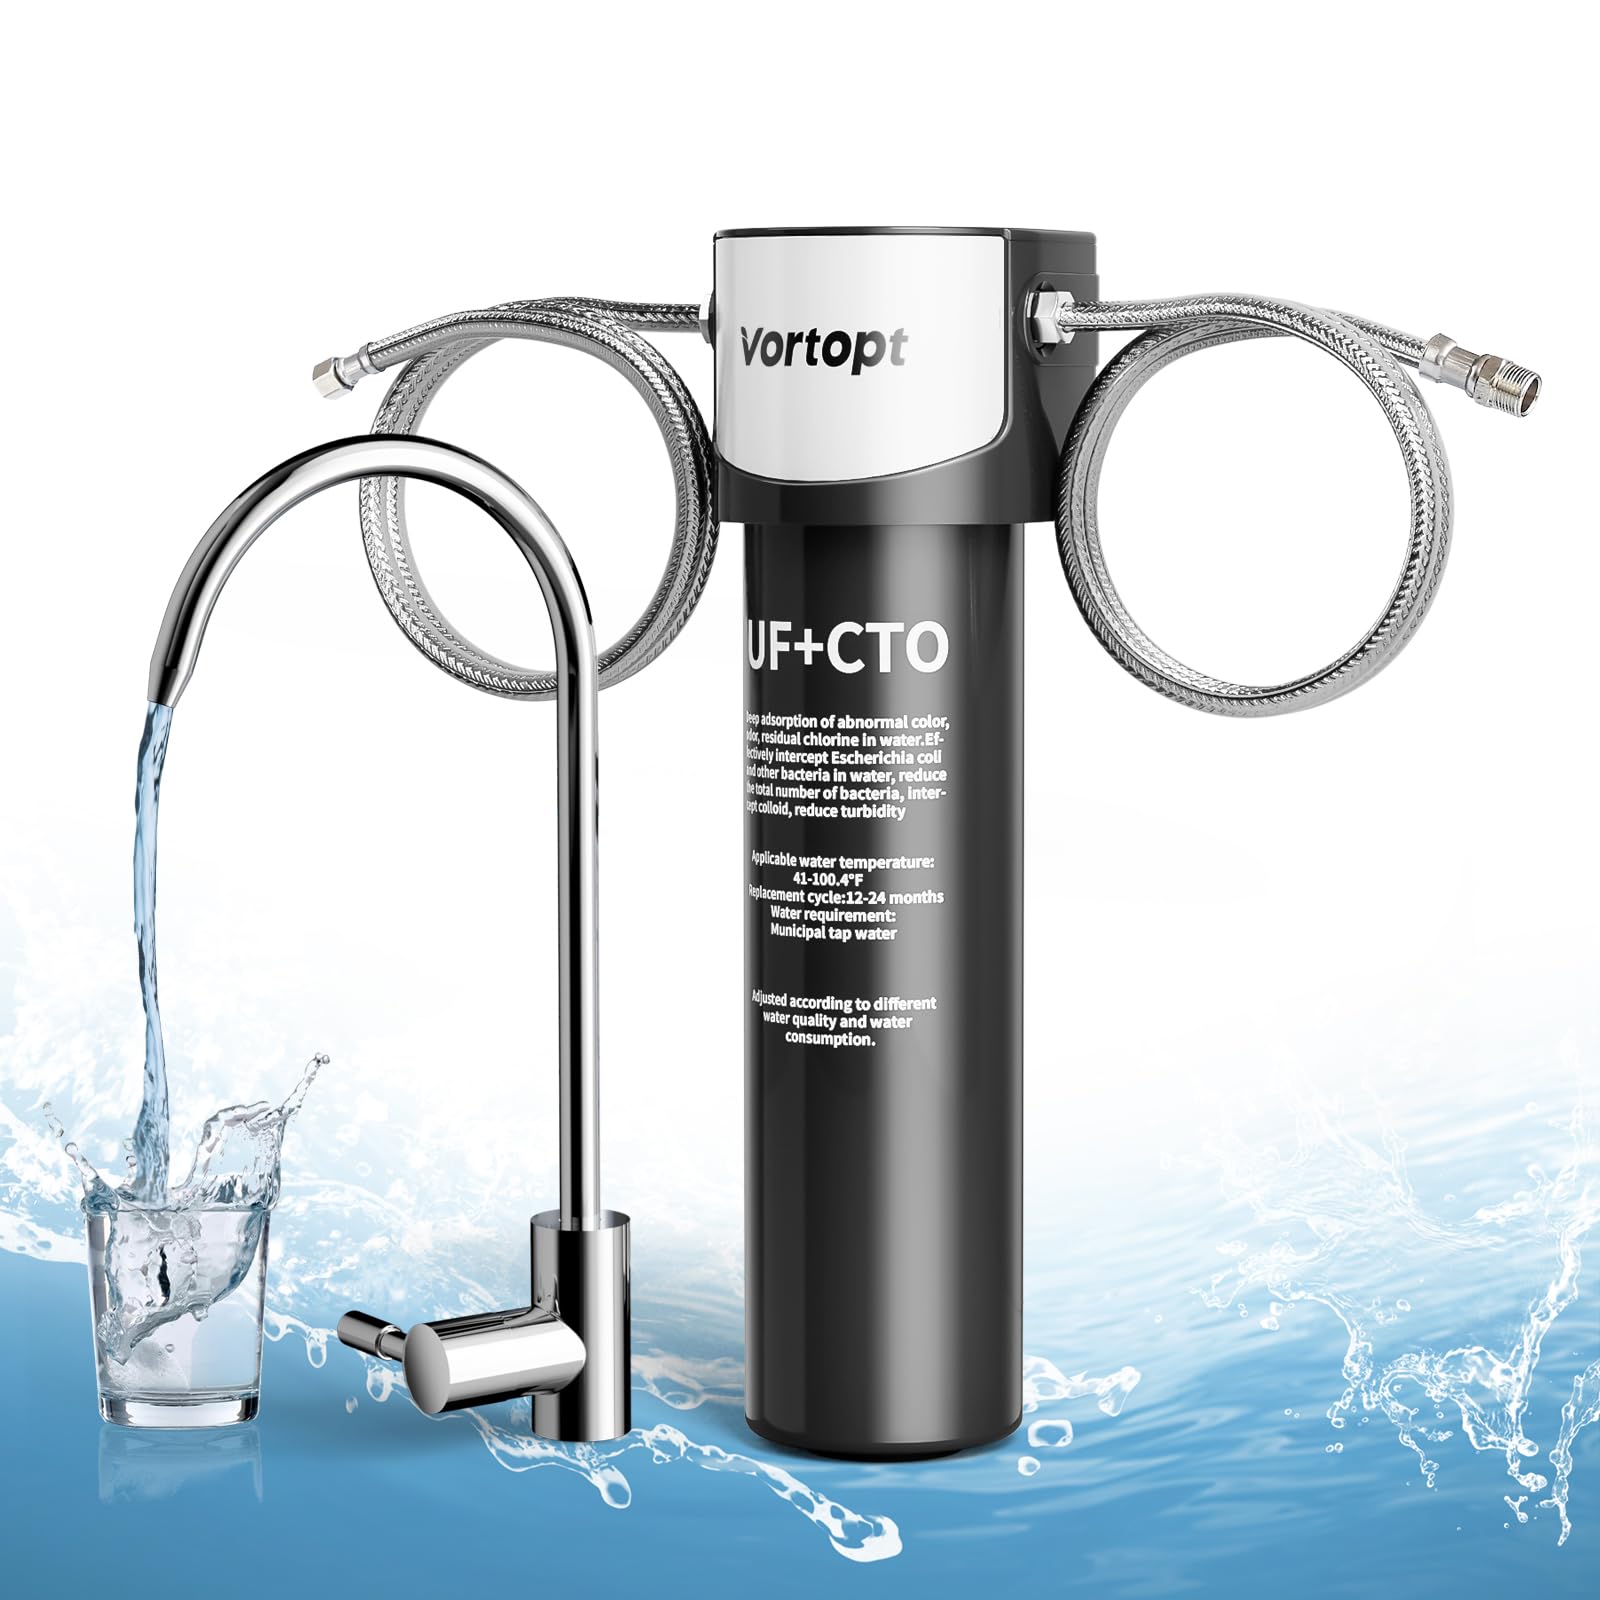 T1 400G Faucet Water Filter for Sink, Vortopt